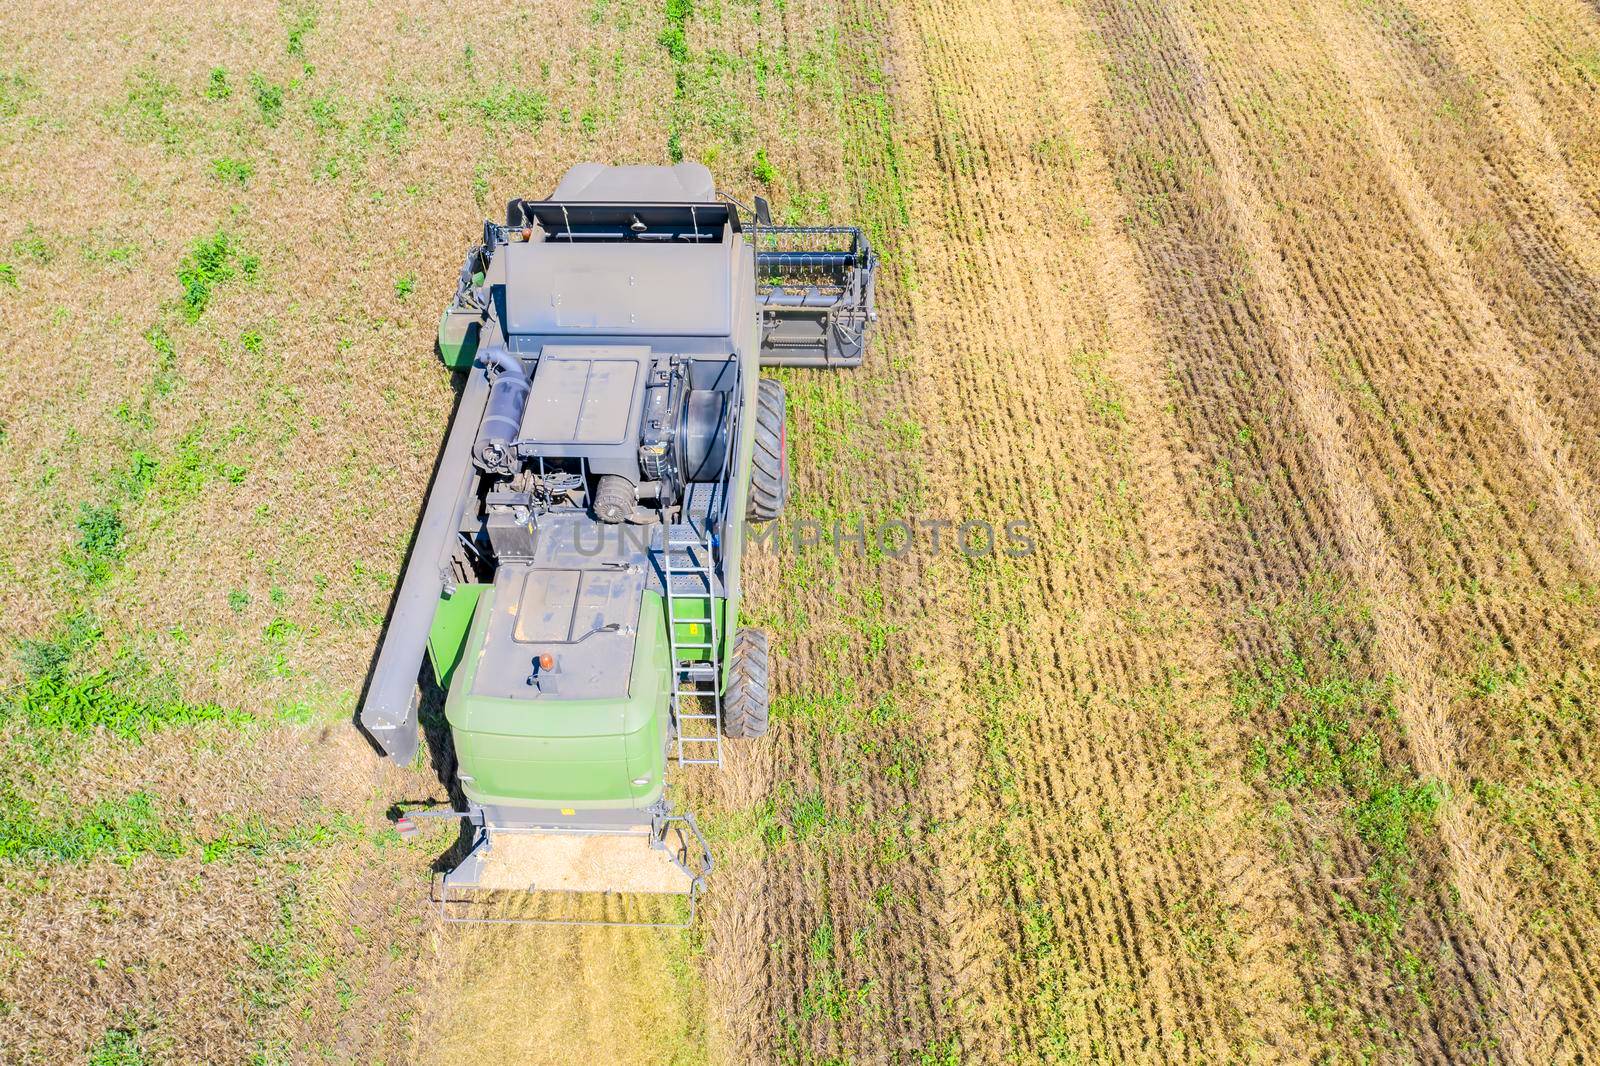 Above view of combine harvesting wheat field by savcoco